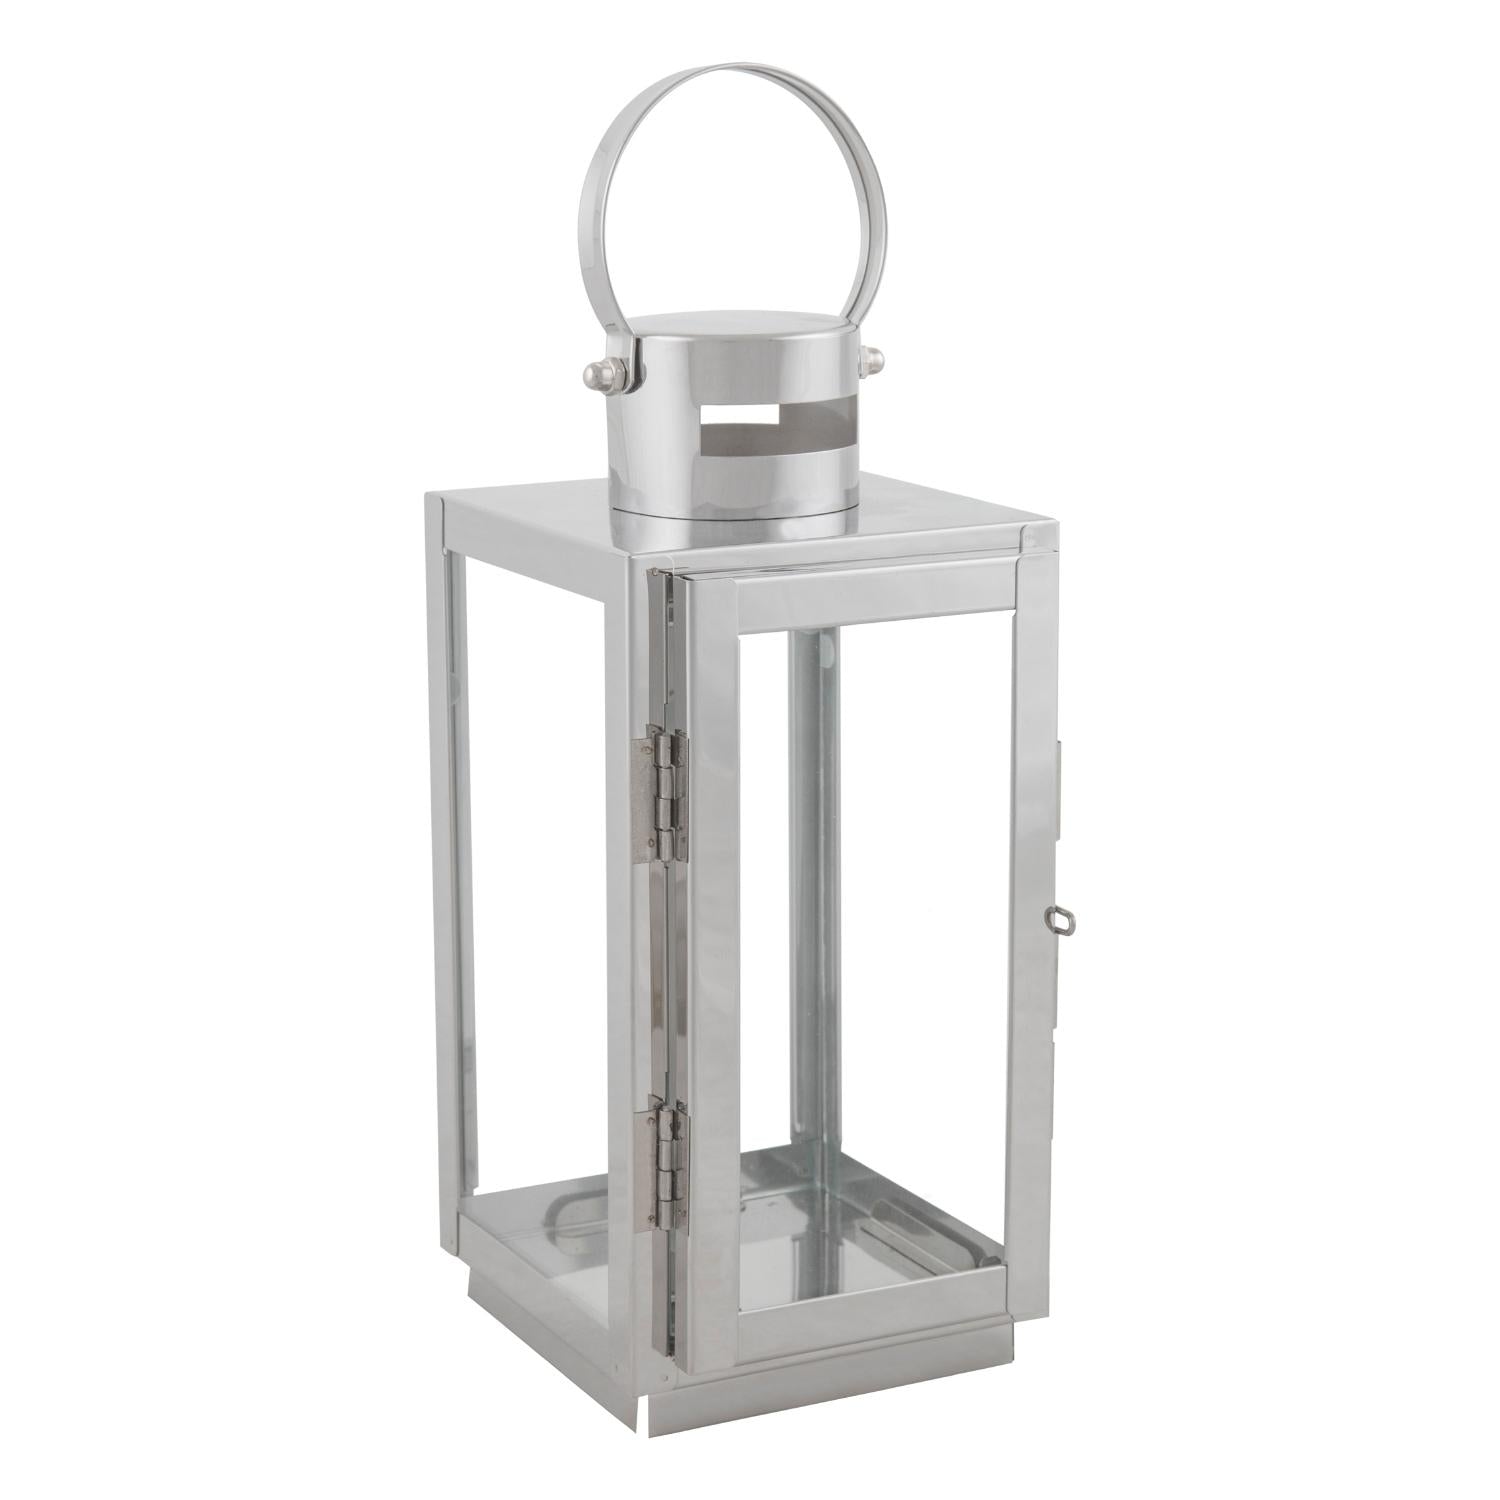 Hire Illuminate Your Space with the Silver Steel Lantern